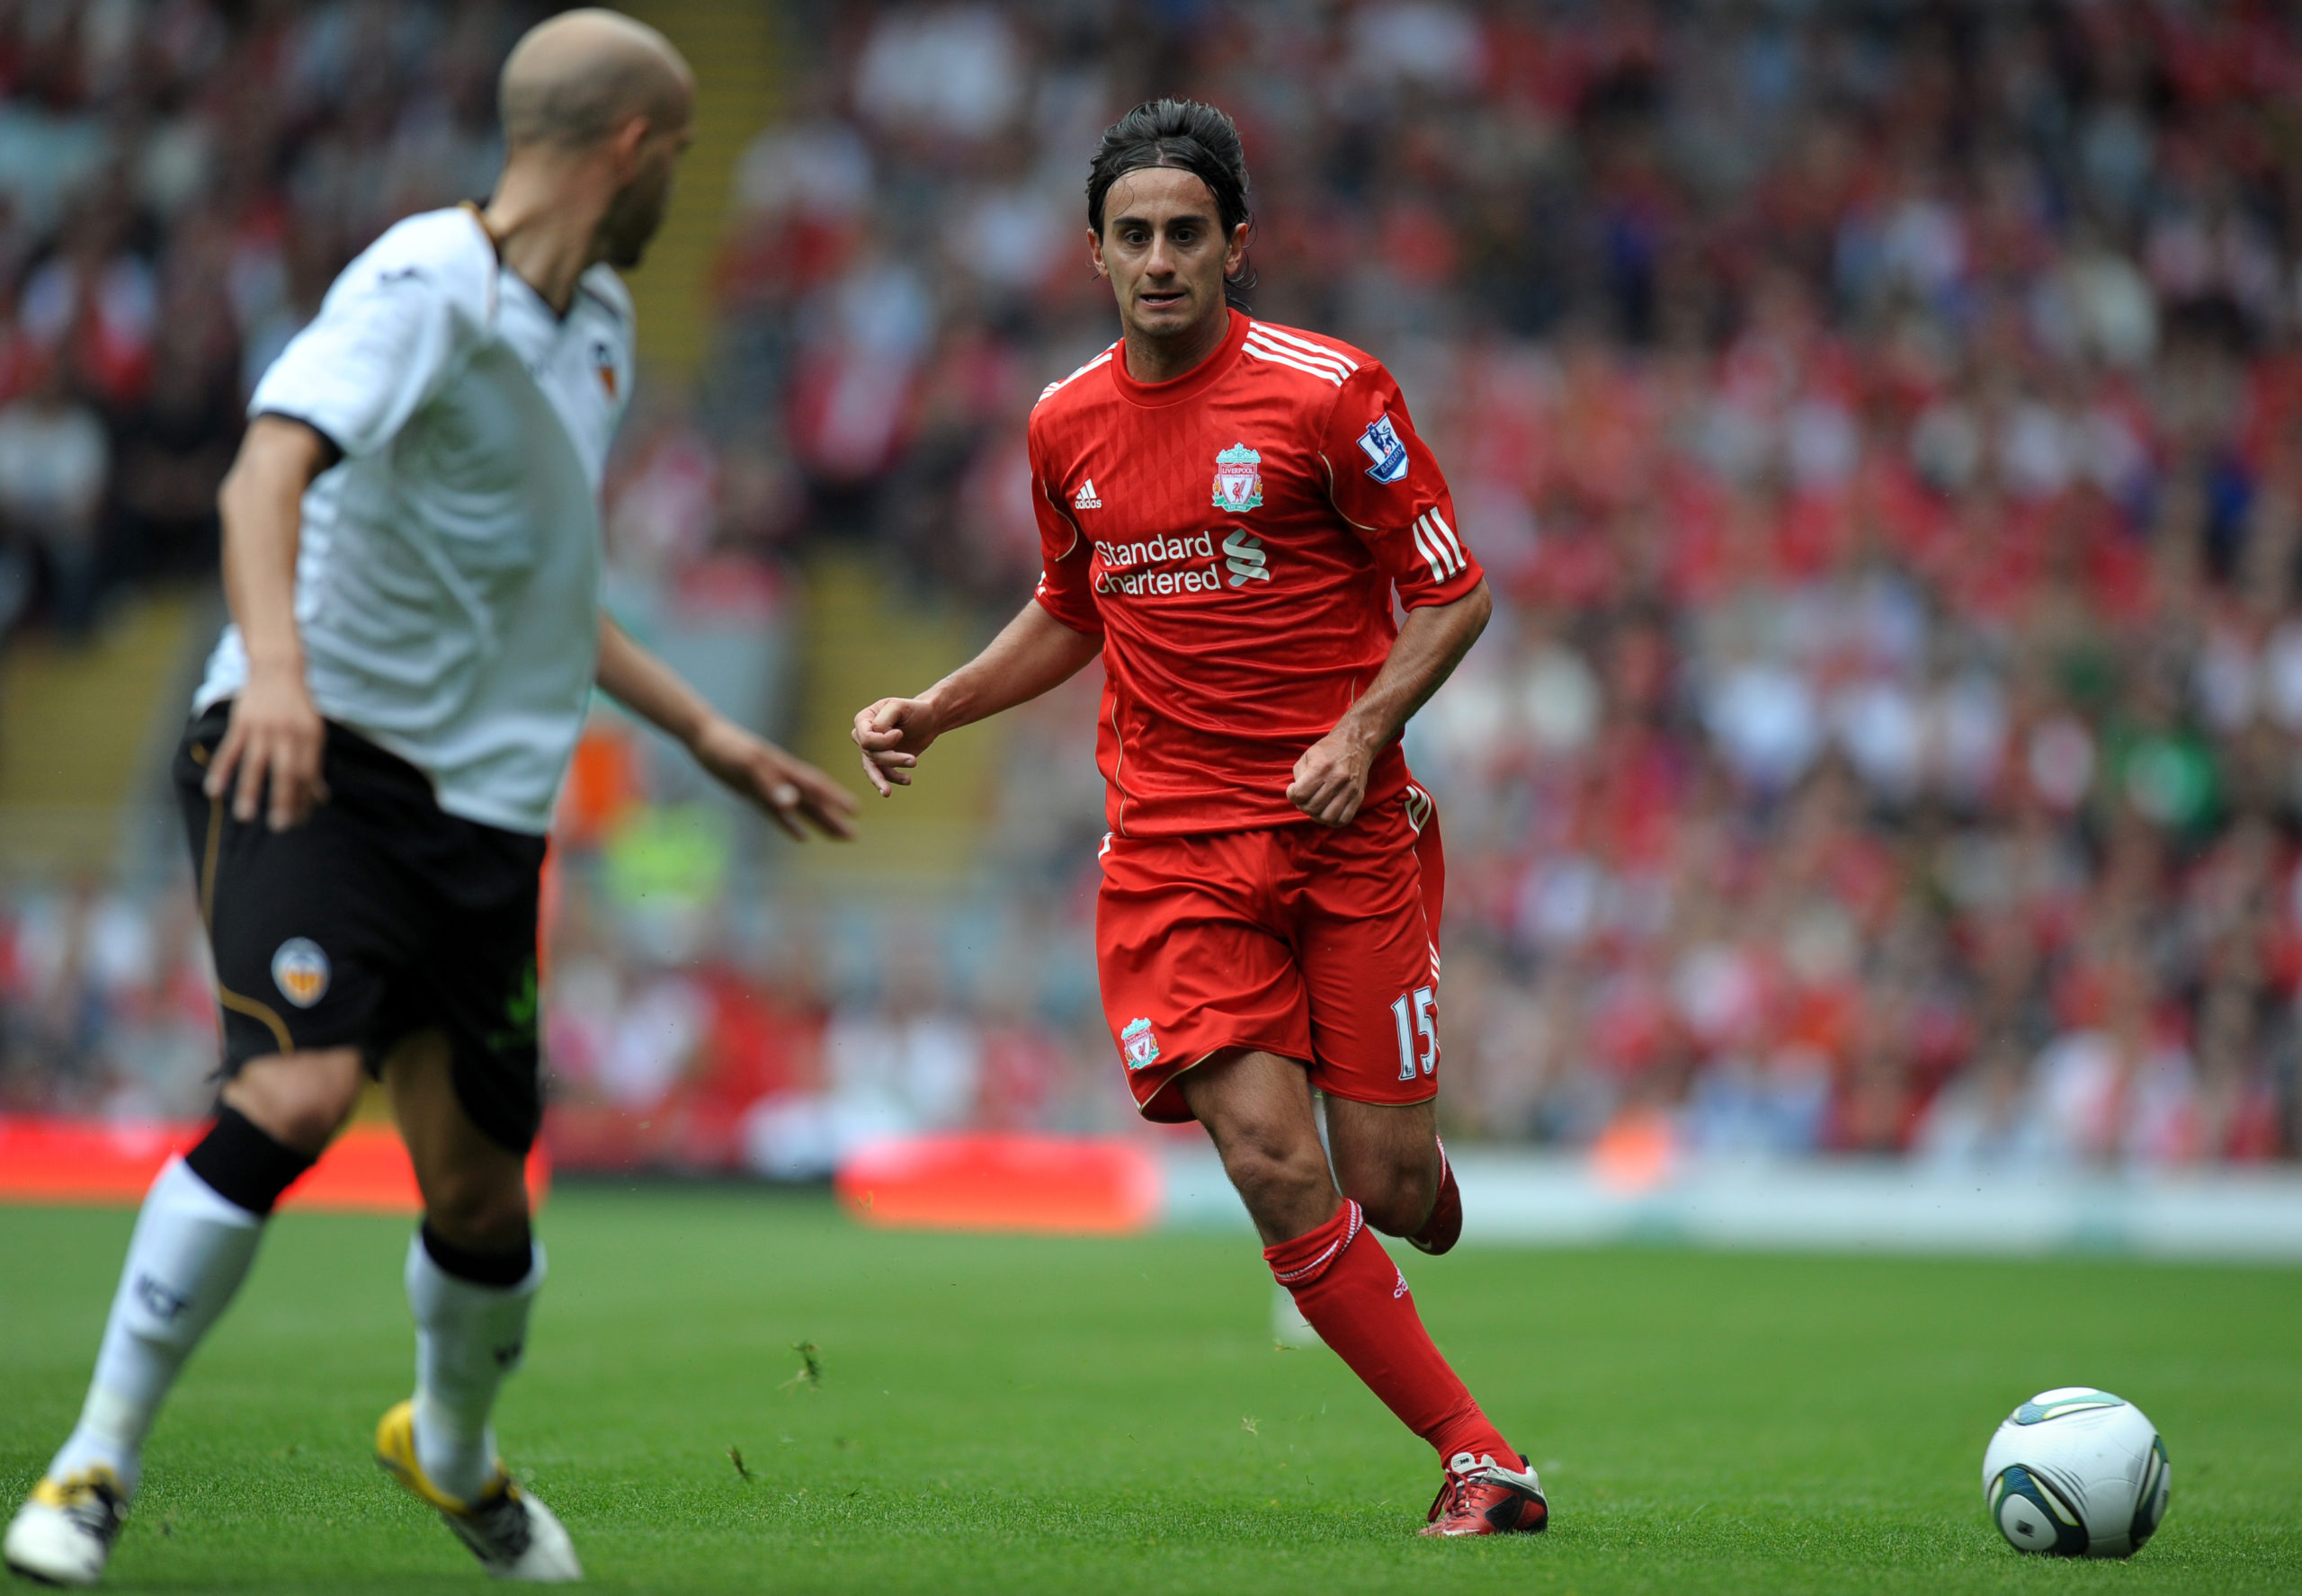 Alberto Aquilani on the moment he knew he had to leave Liverpool